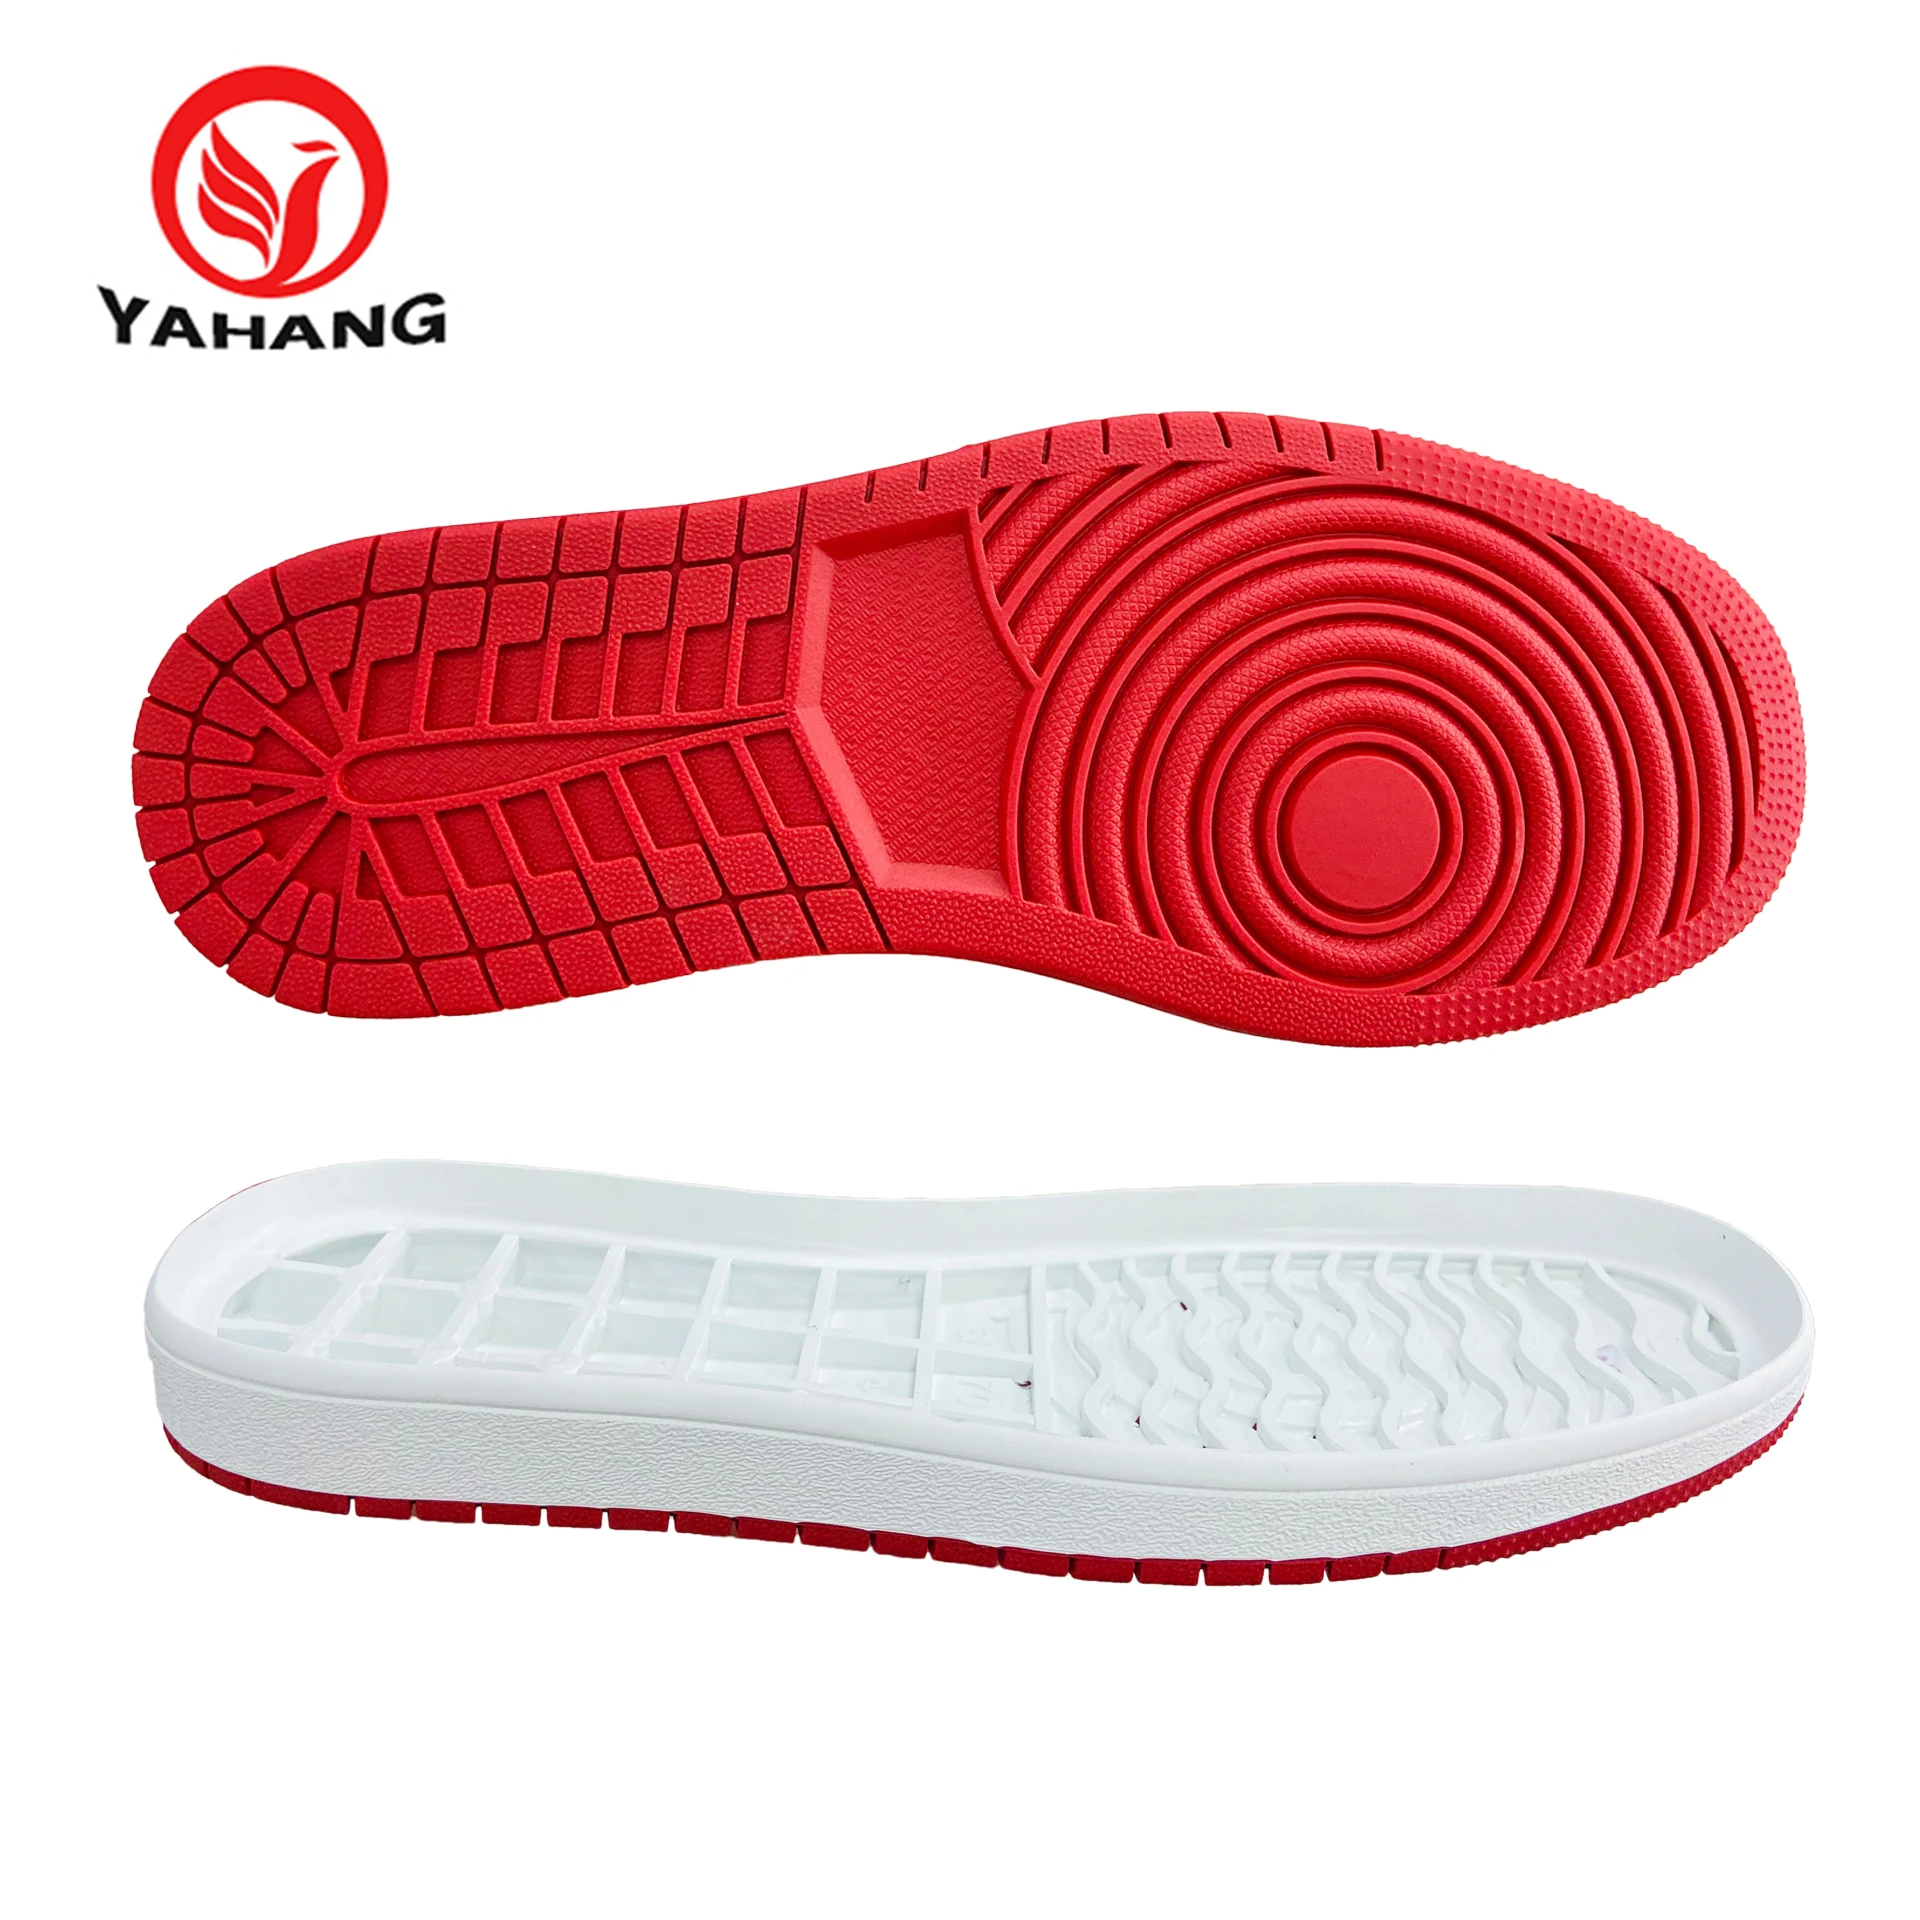 outsole of shoes